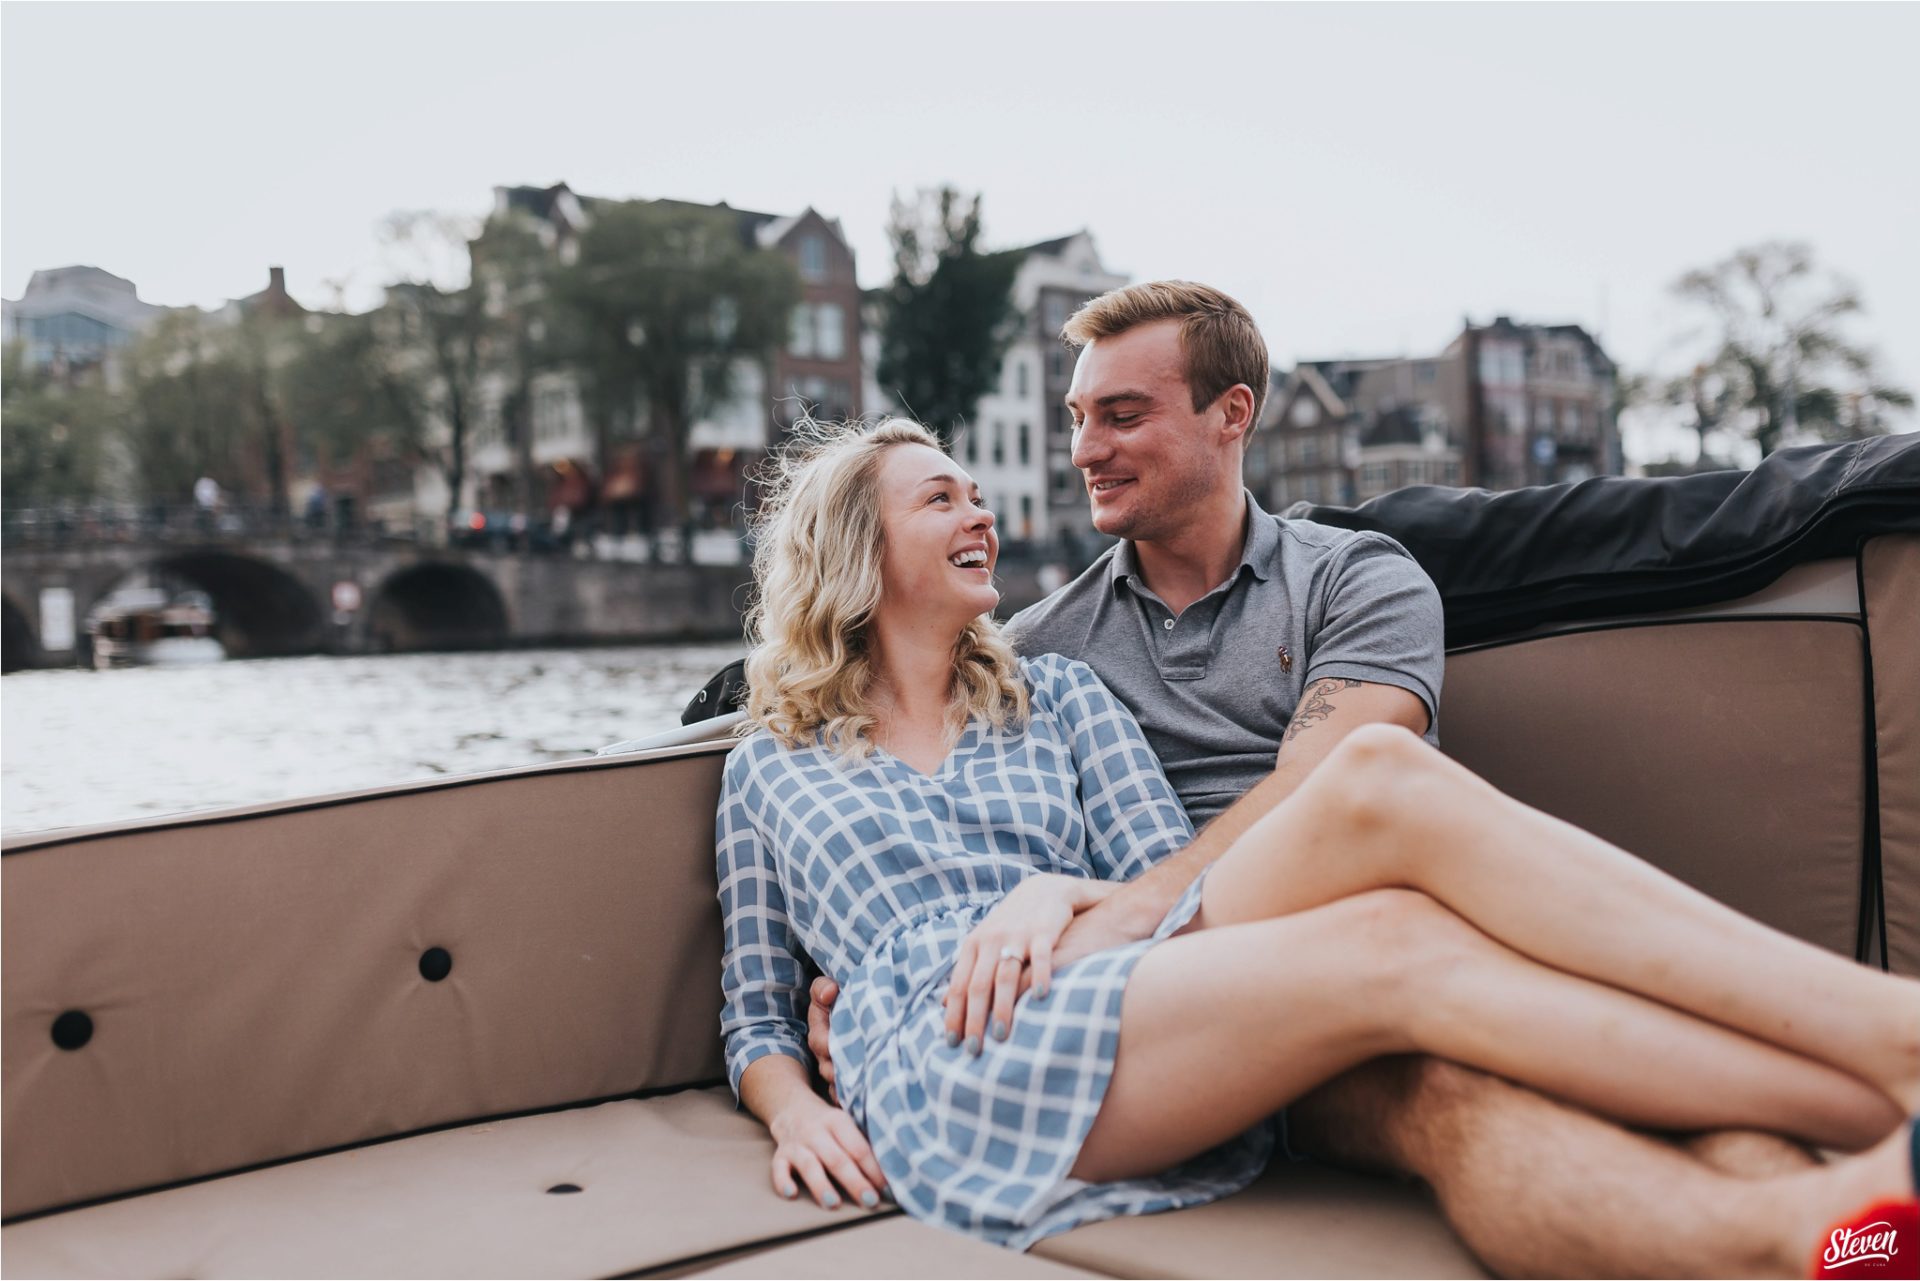 2017-09-20_0012-1920x1281 Canals of Amsterdam Engagement: Yllena and Stas Engagement 